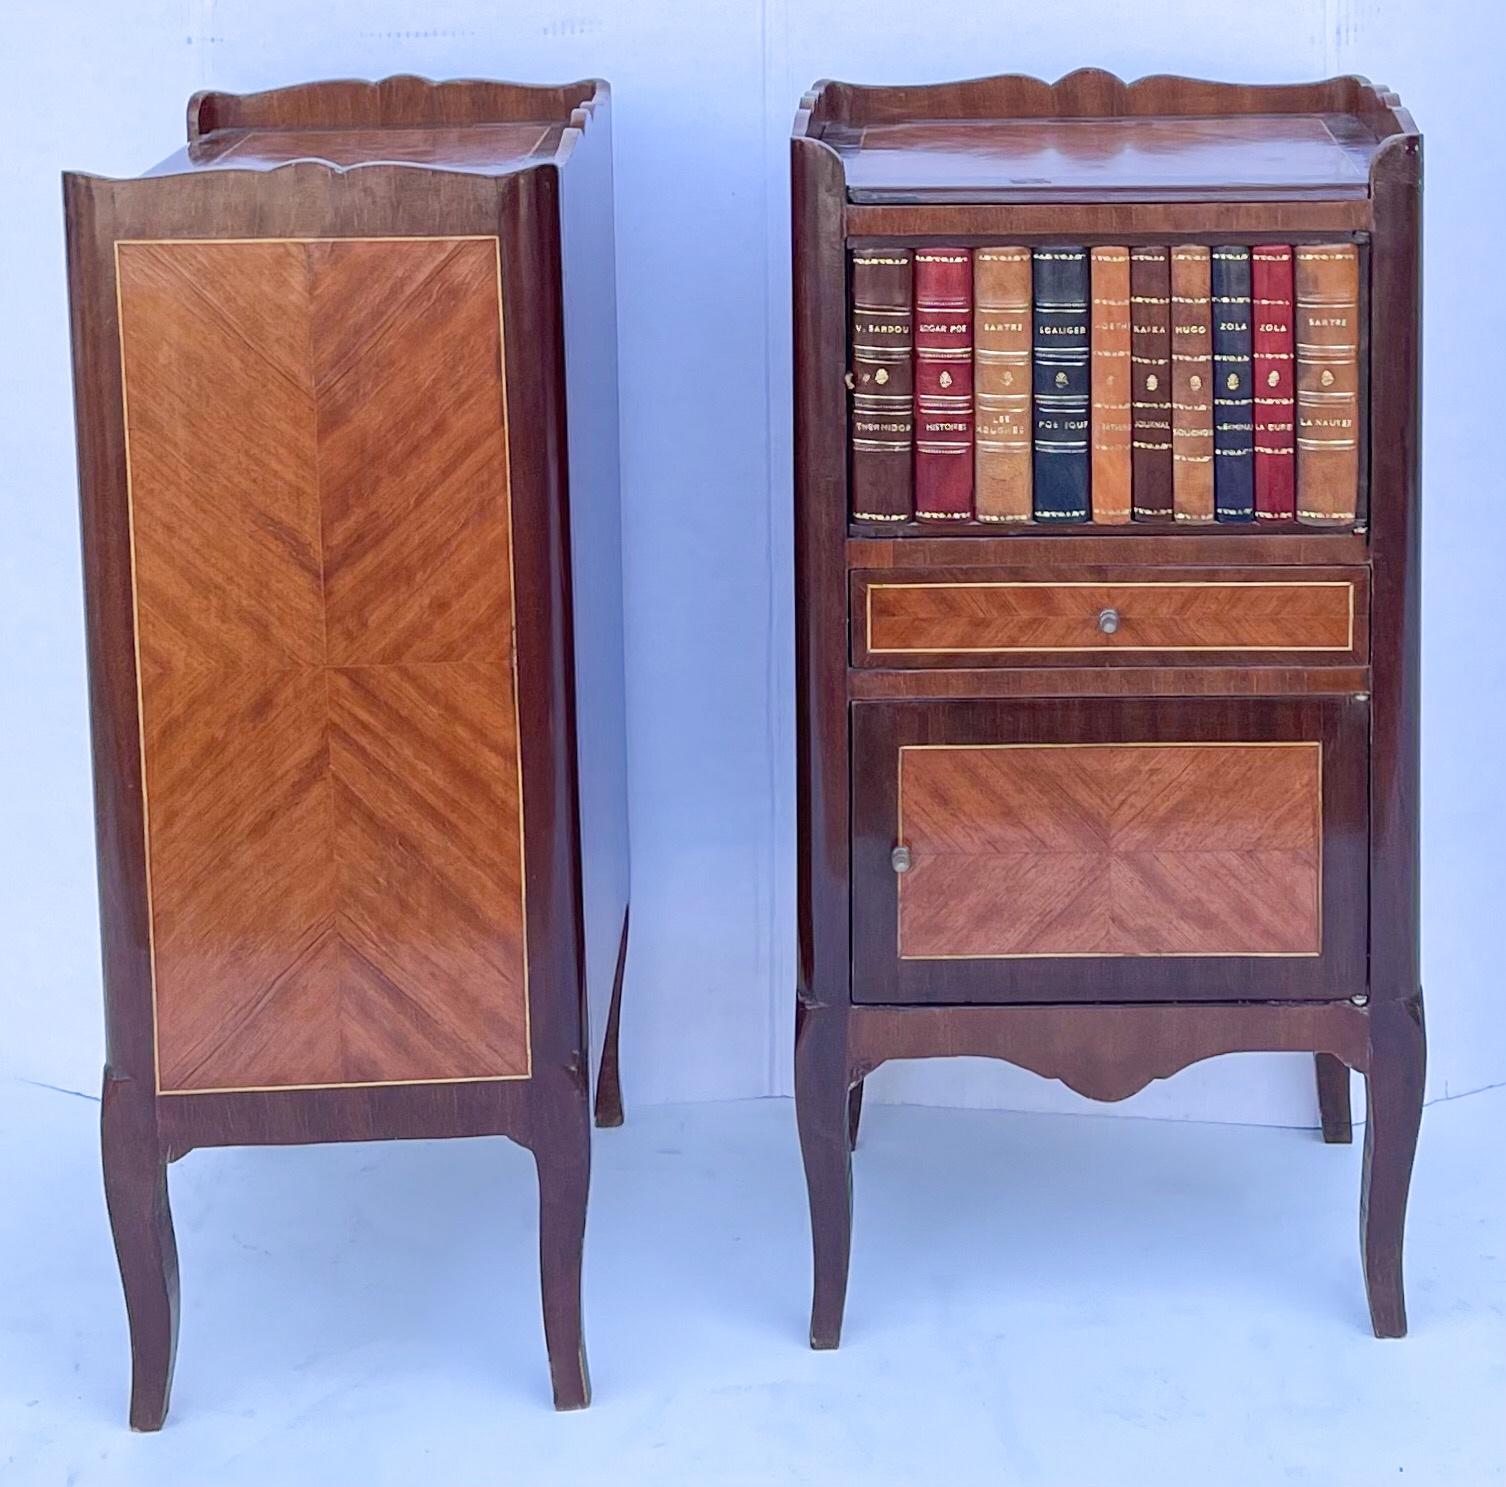 Neoclassical 1950s French Style Inlaid Mahogany and Leather Faux Book Side Tables, Pair For Sale